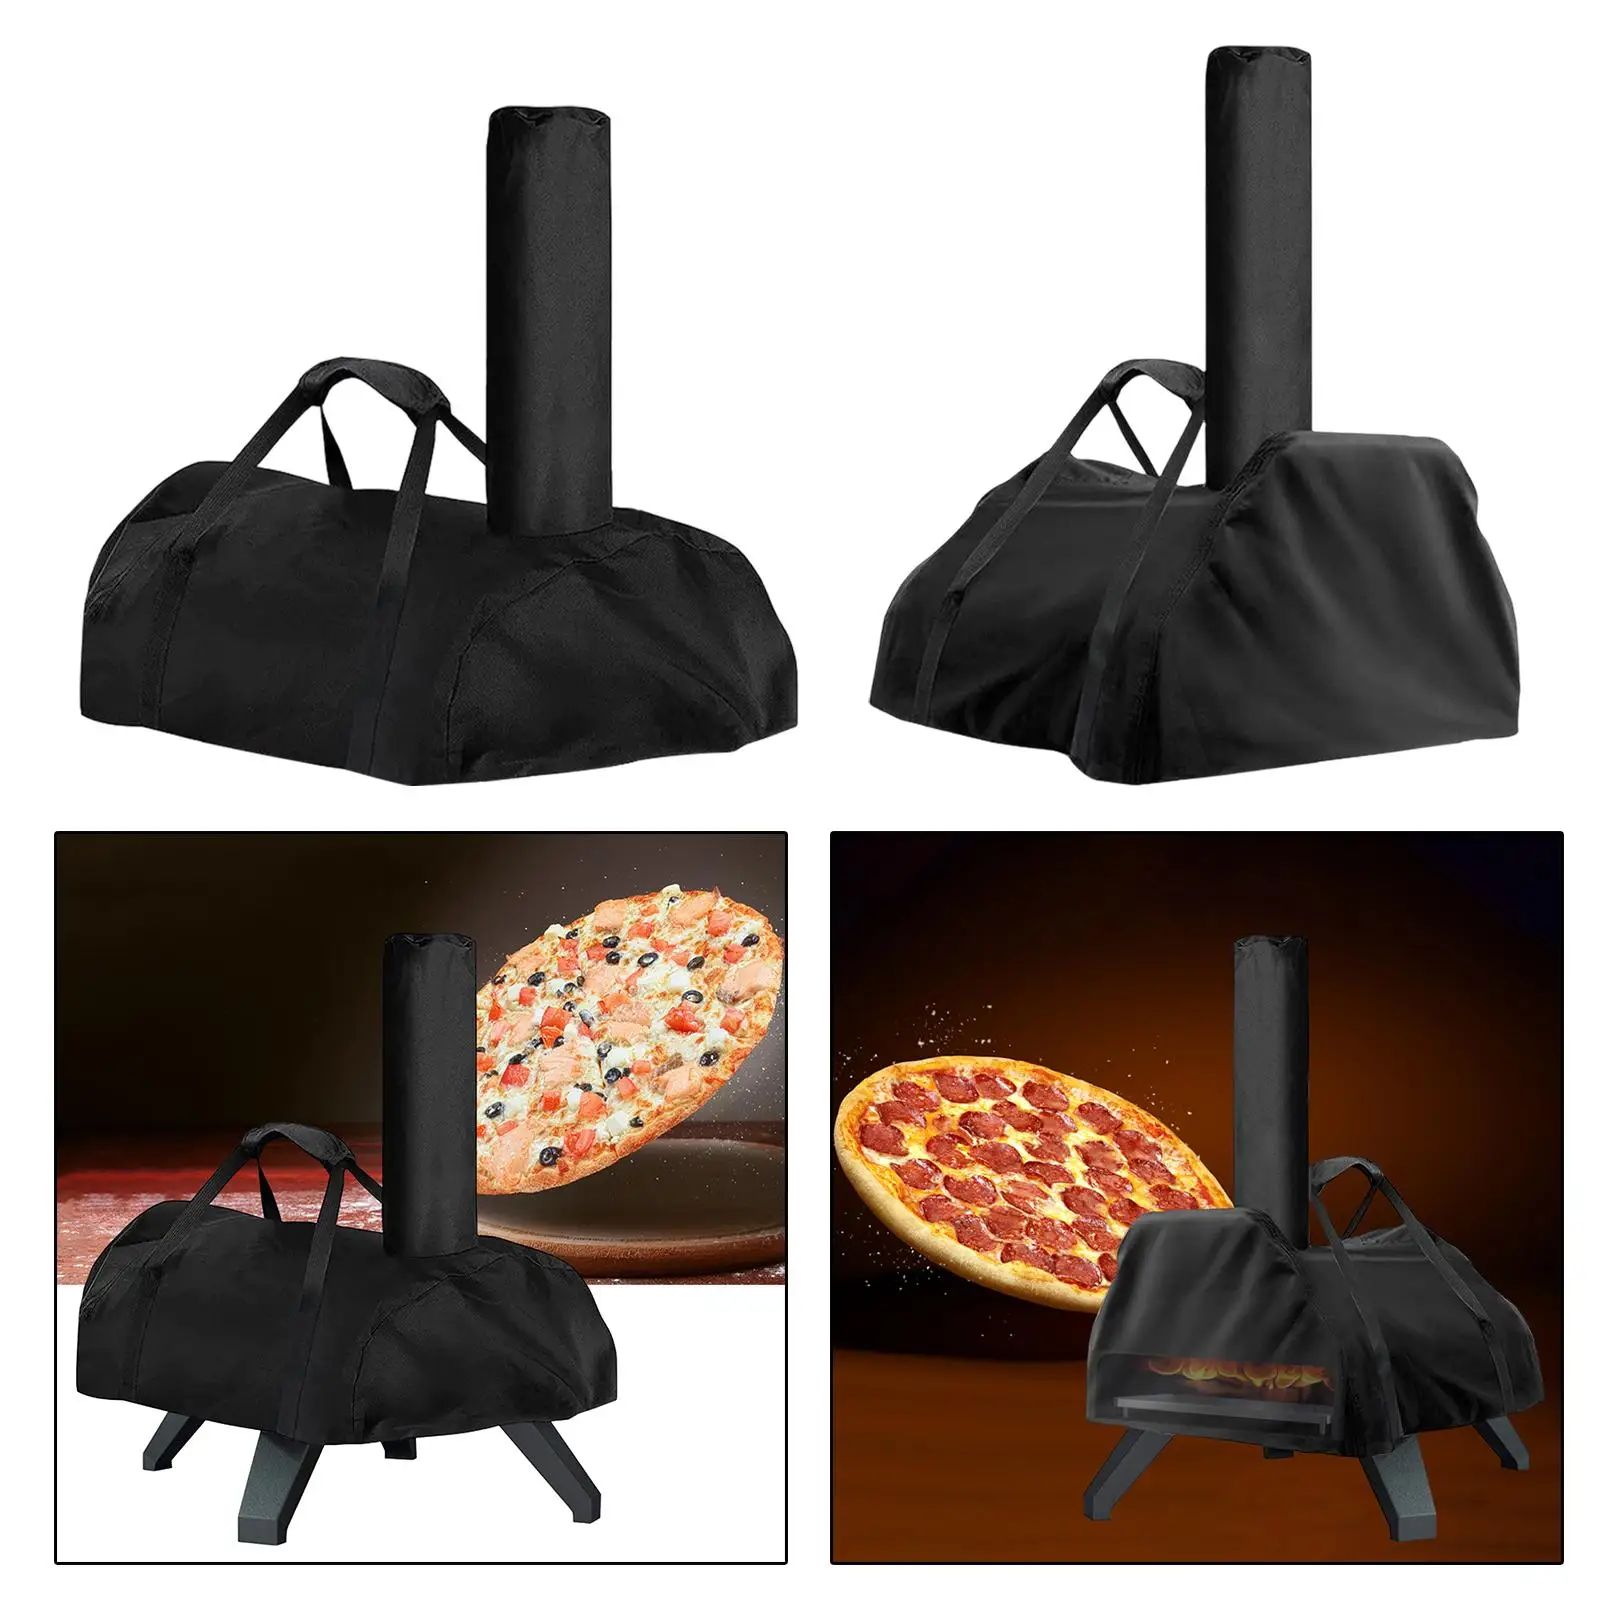 Outdoor Pizza Oven Cover Fittings Dustproof Waterproof Durable Portable Supply for Household Camping Traveling RV Trip